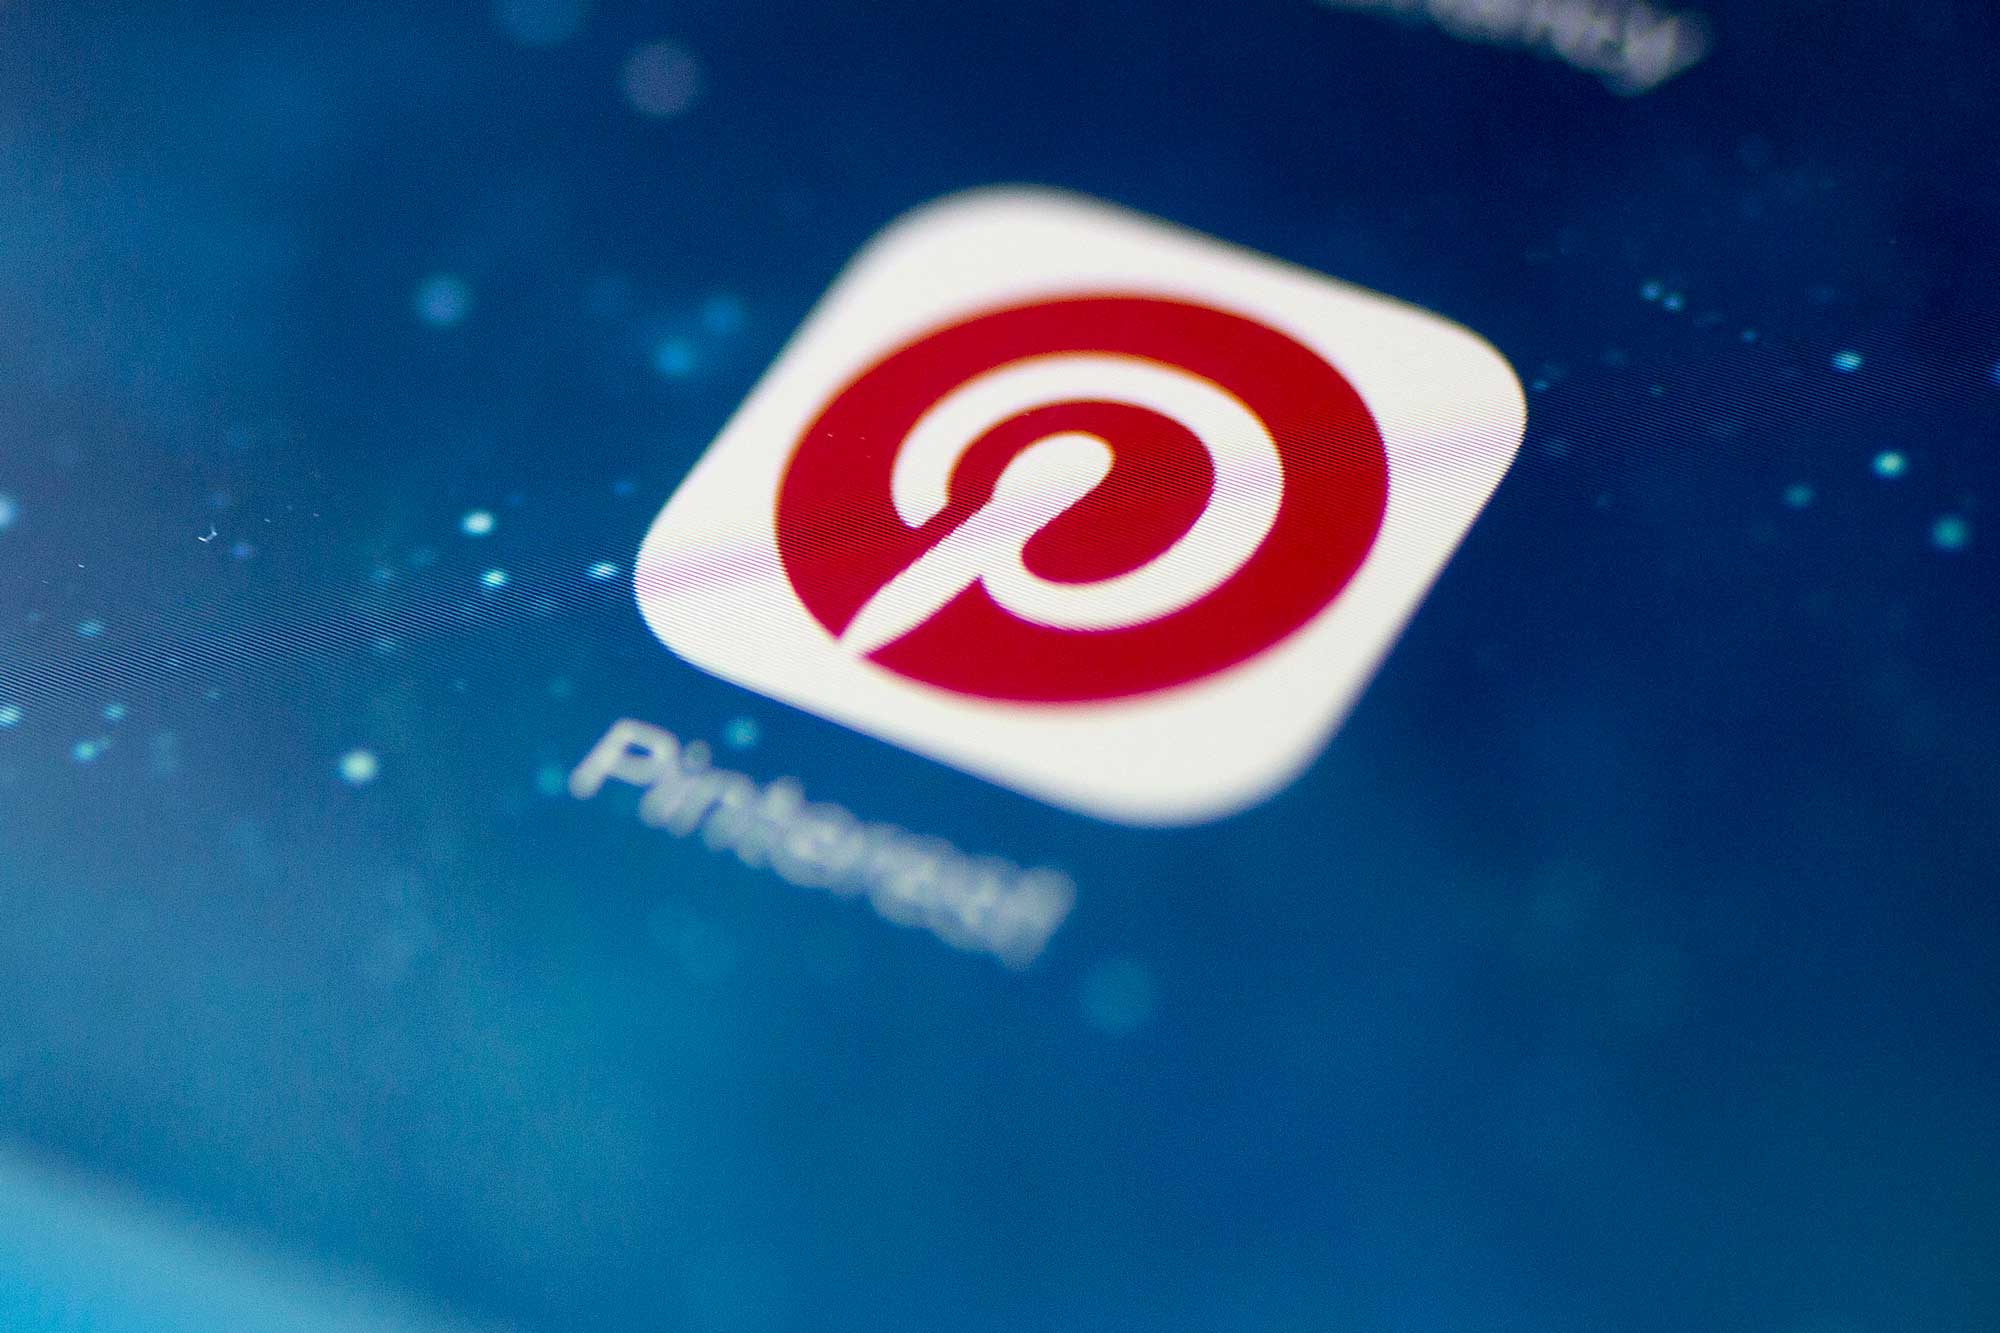 Pinterest stock rockets 18% after earnings beat, advertising outlook